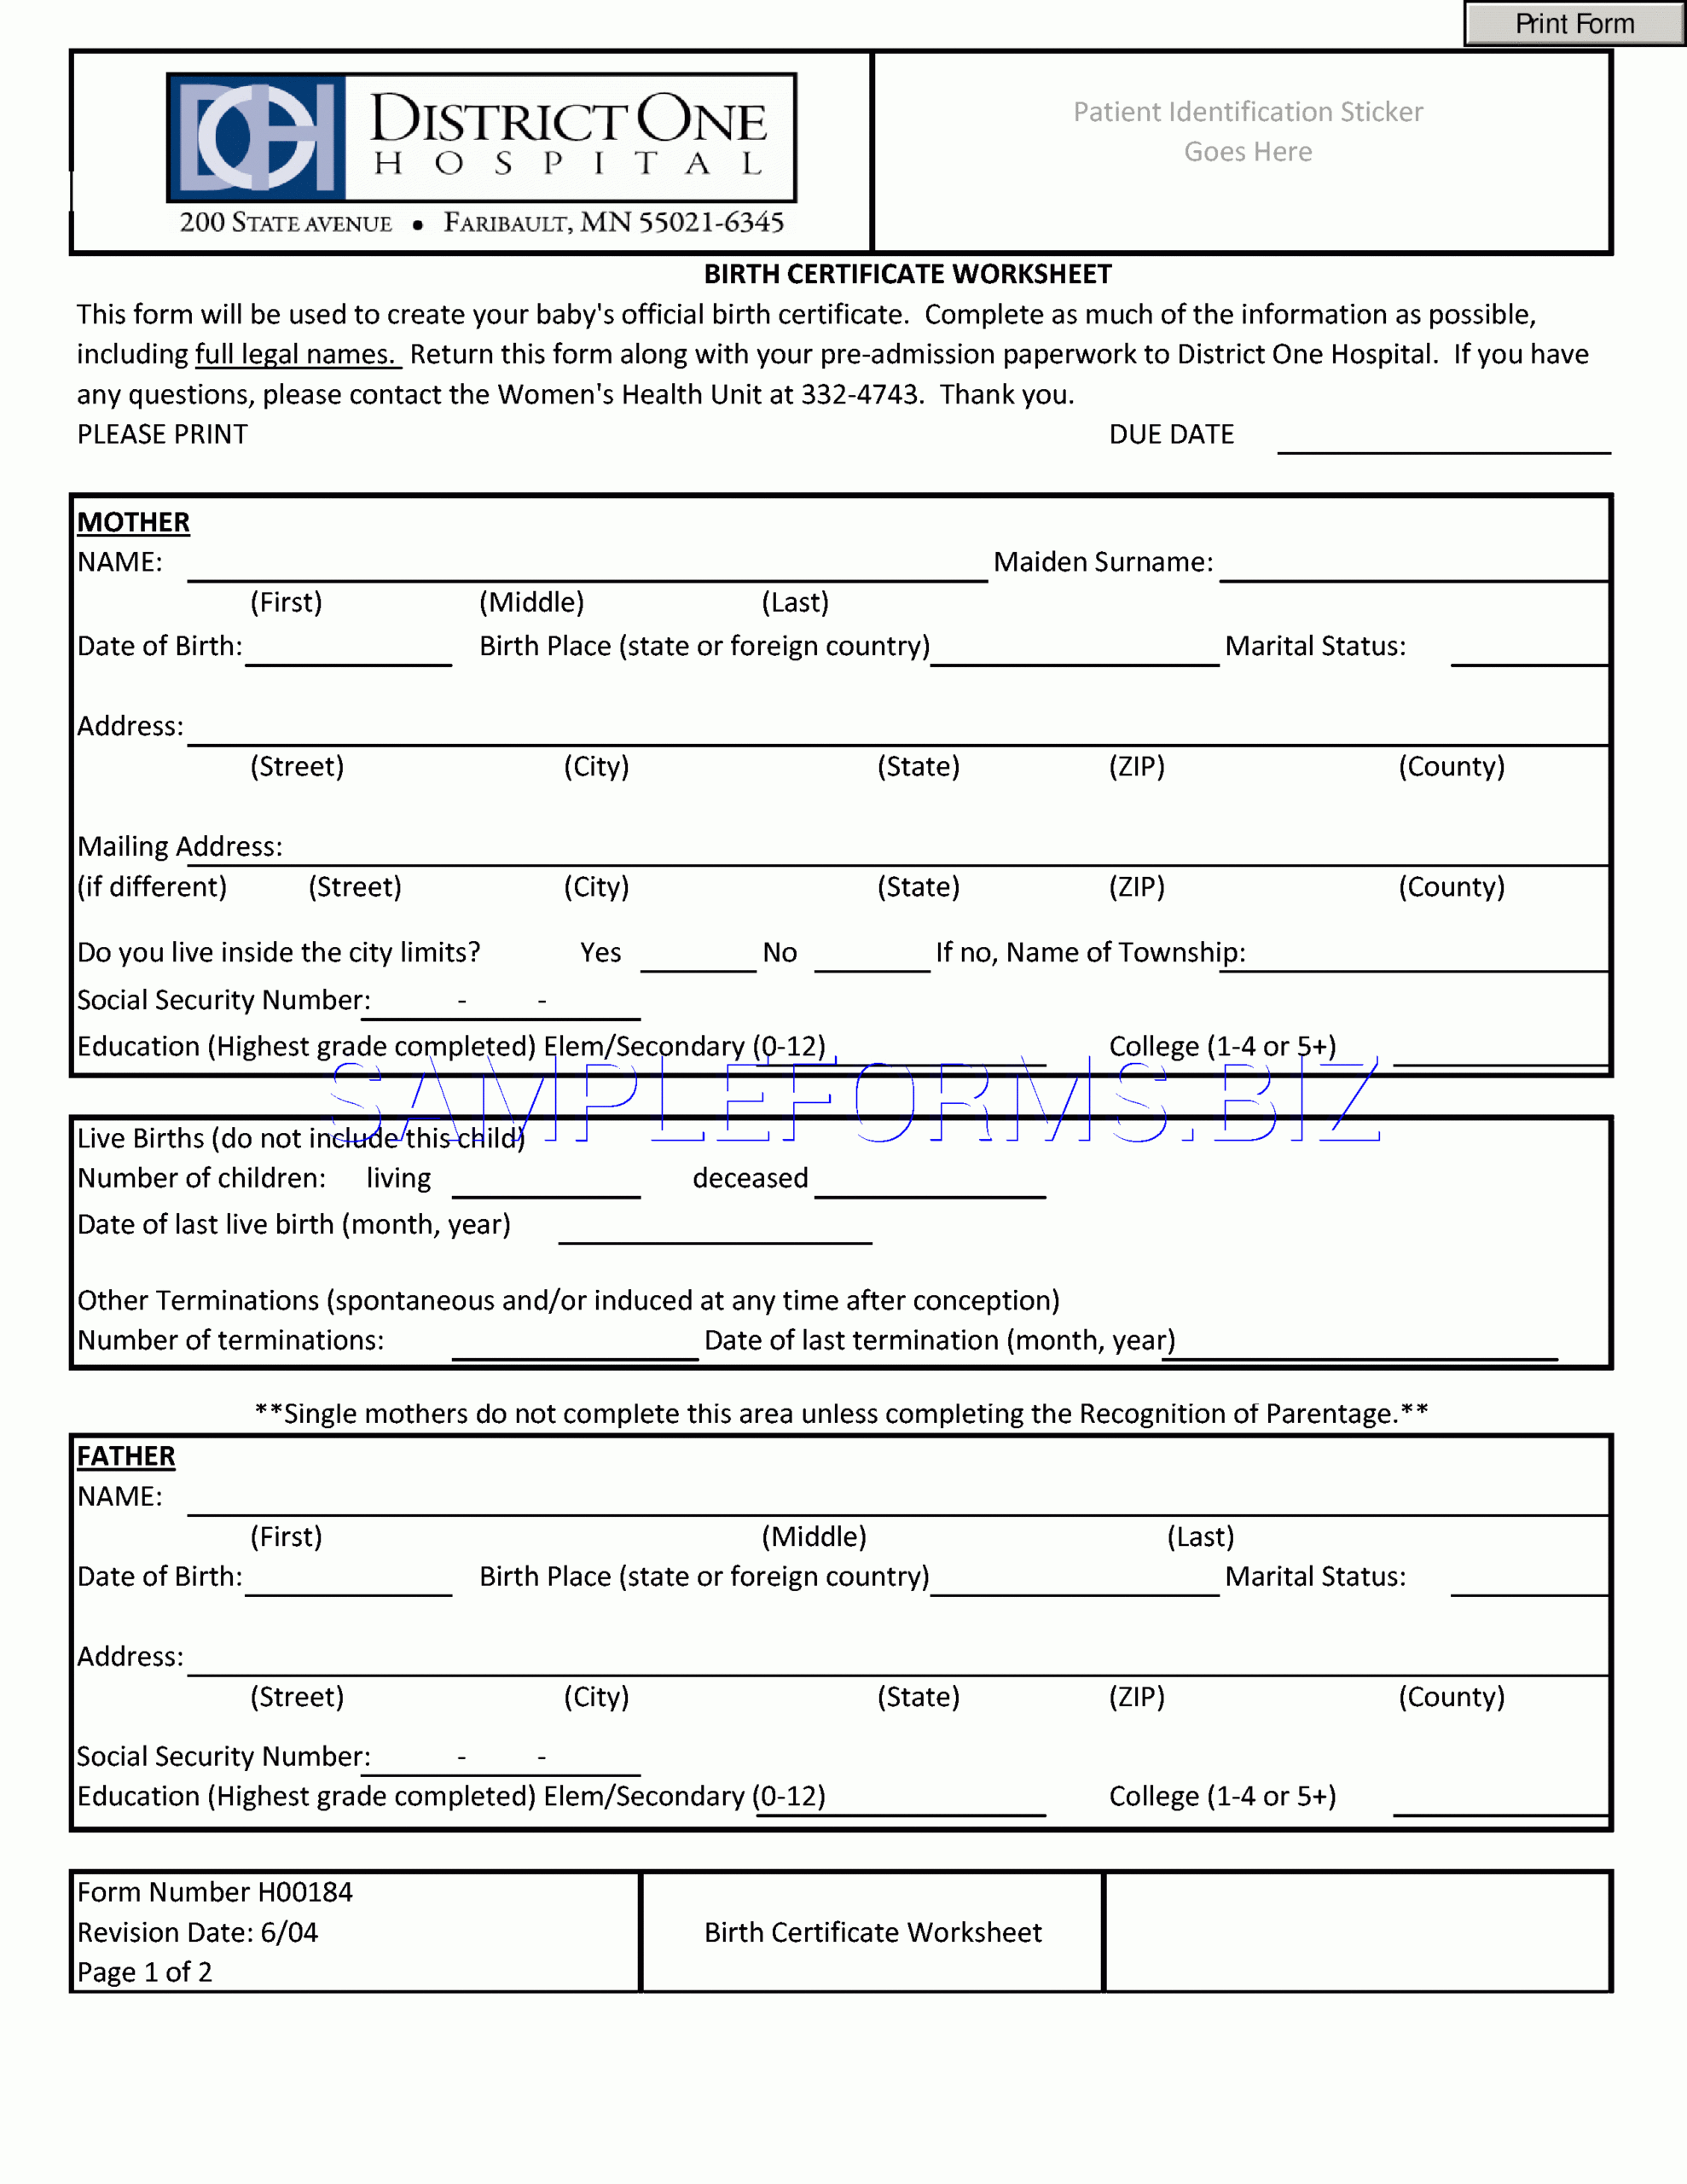 Preview Pdf Birth Certificate Worksheet, 2 Pertaining To Baby Death Certificate Template